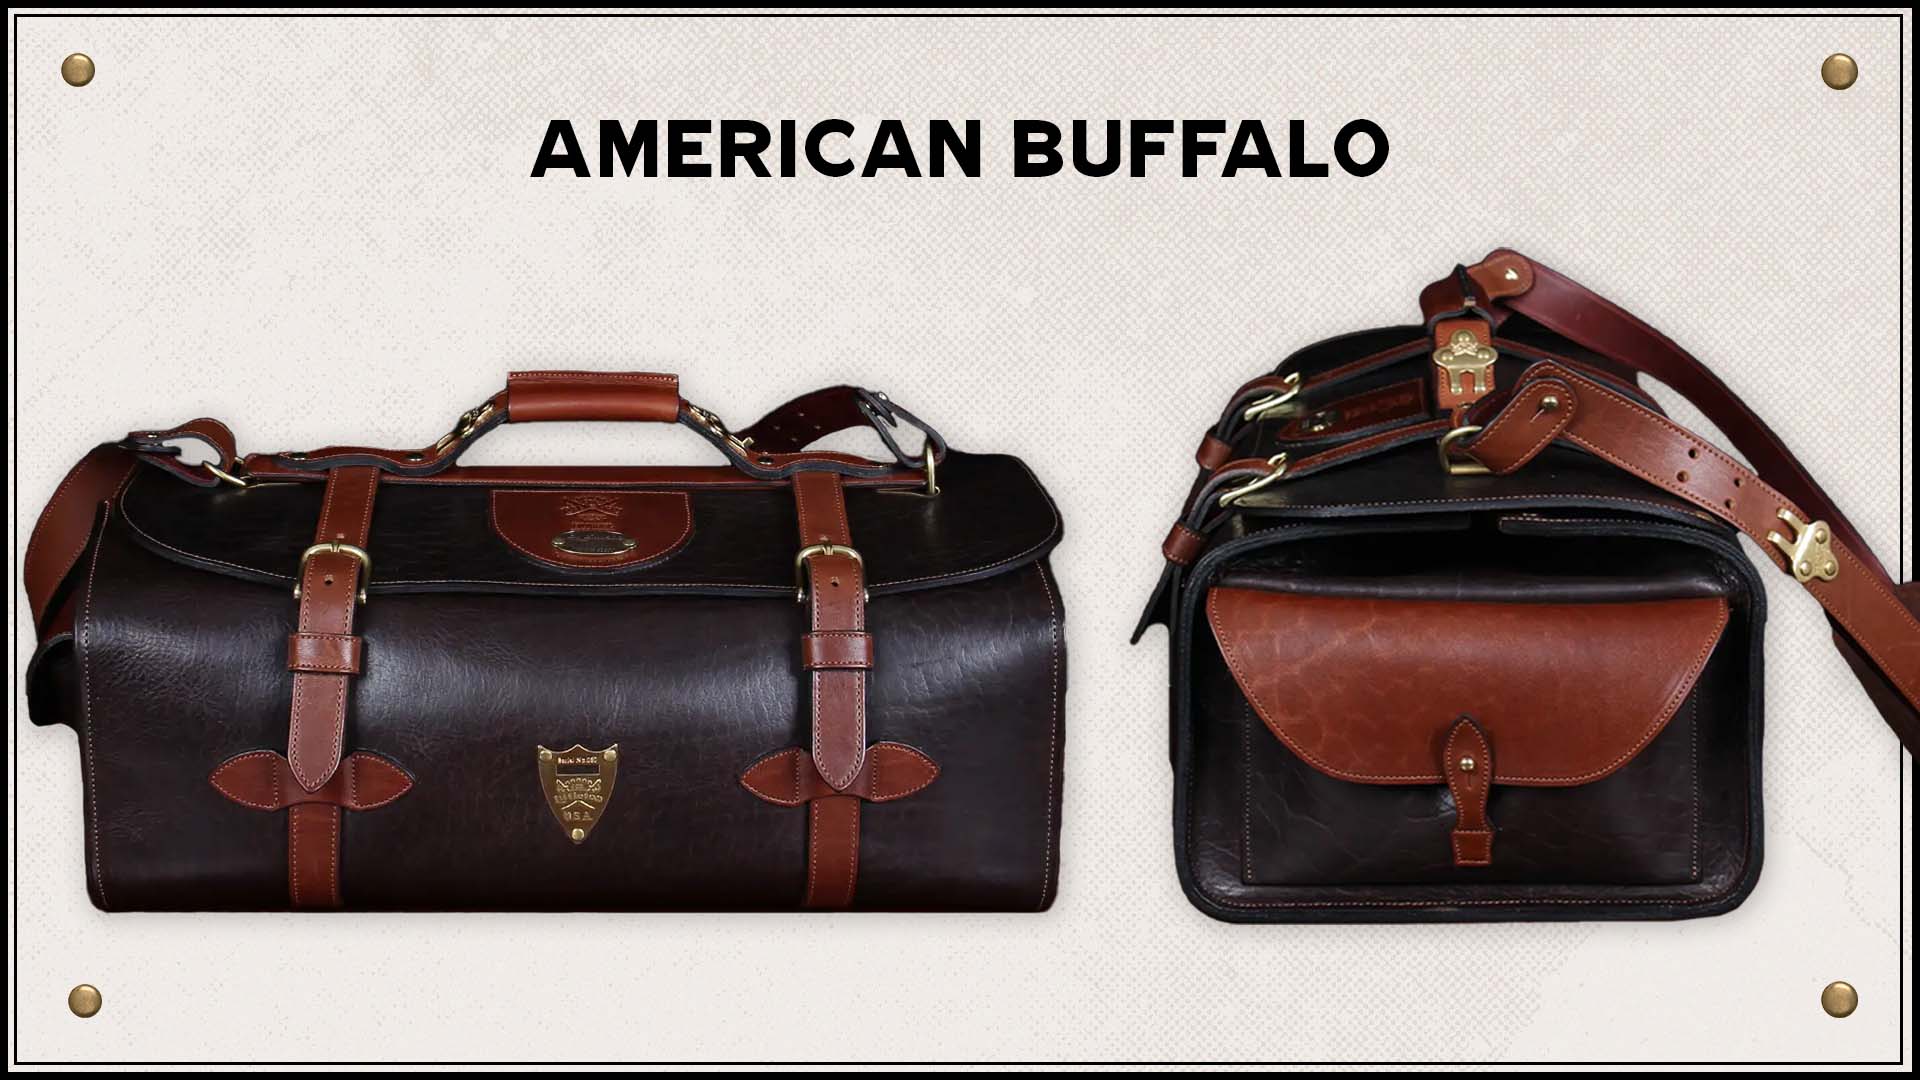 No. 2 Duffel Bag front and side view in American Buffalo